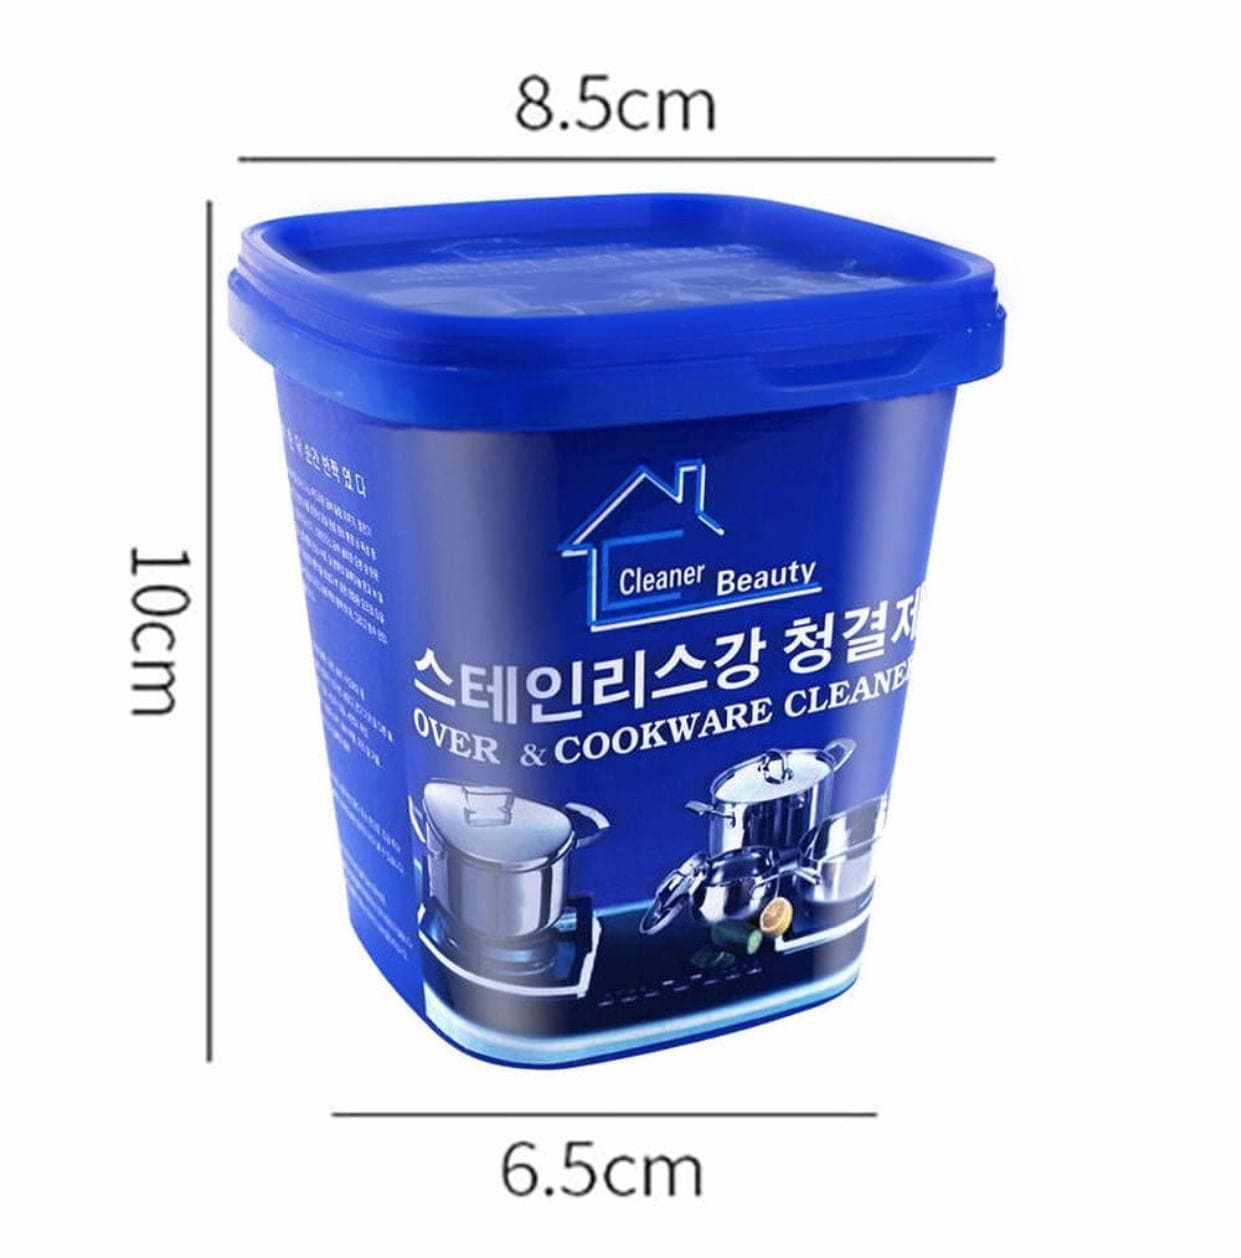 500Gm Powerful Rust Remover Stainless Steel Pot Cleaning Paste, Kitchenwar Stain Dirt Cleaner, Powerful Stainless Steel Cookware Cleaning Paste